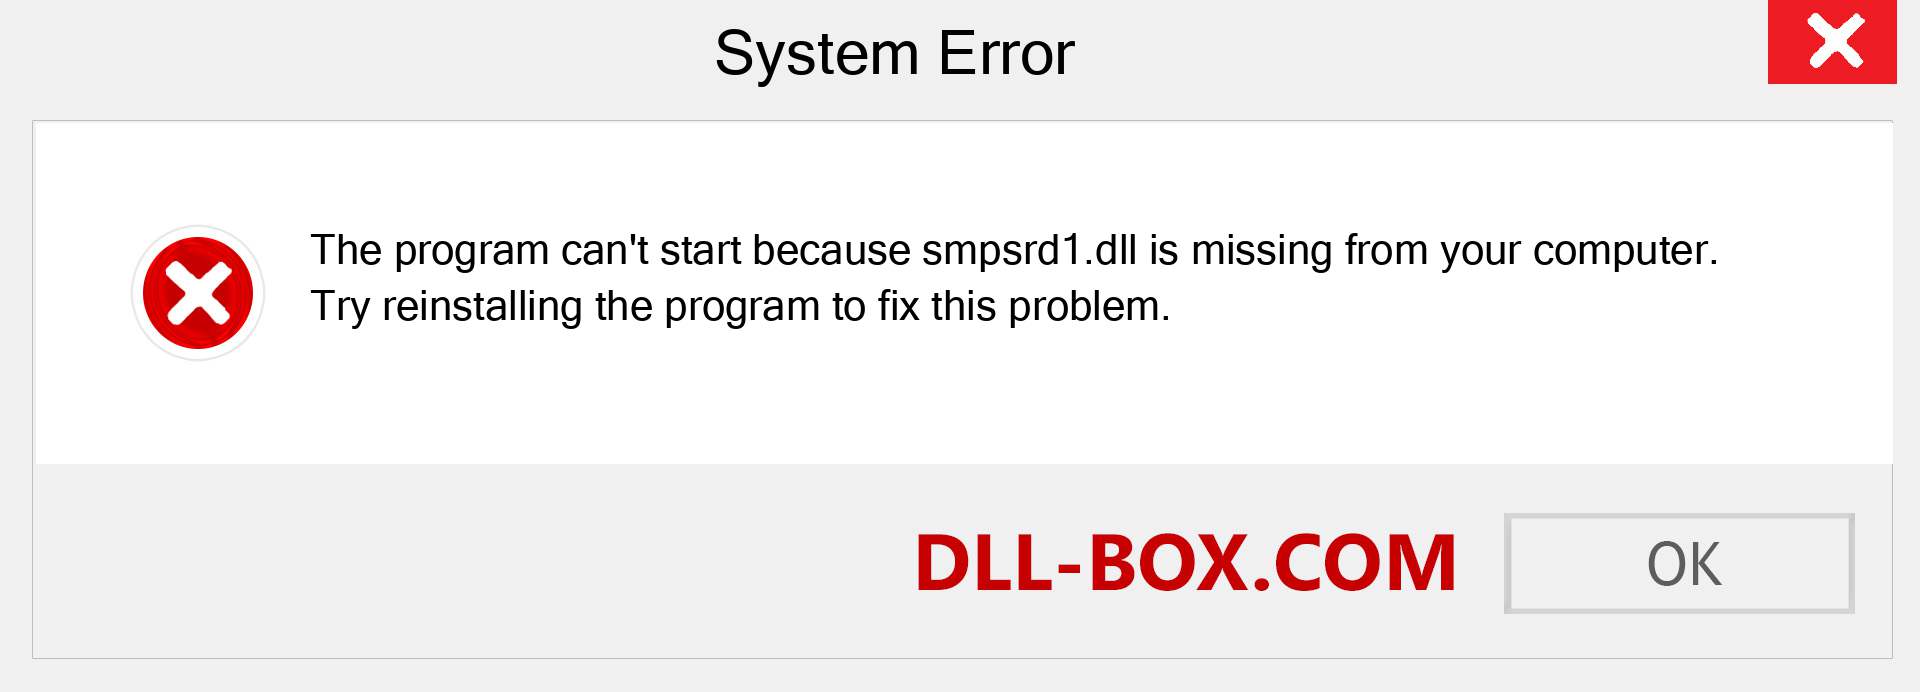  smpsrd1.dll file is missing?. Download for Windows 7, 8, 10 - Fix  smpsrd1 dll Missing Error on Windows, photos, images